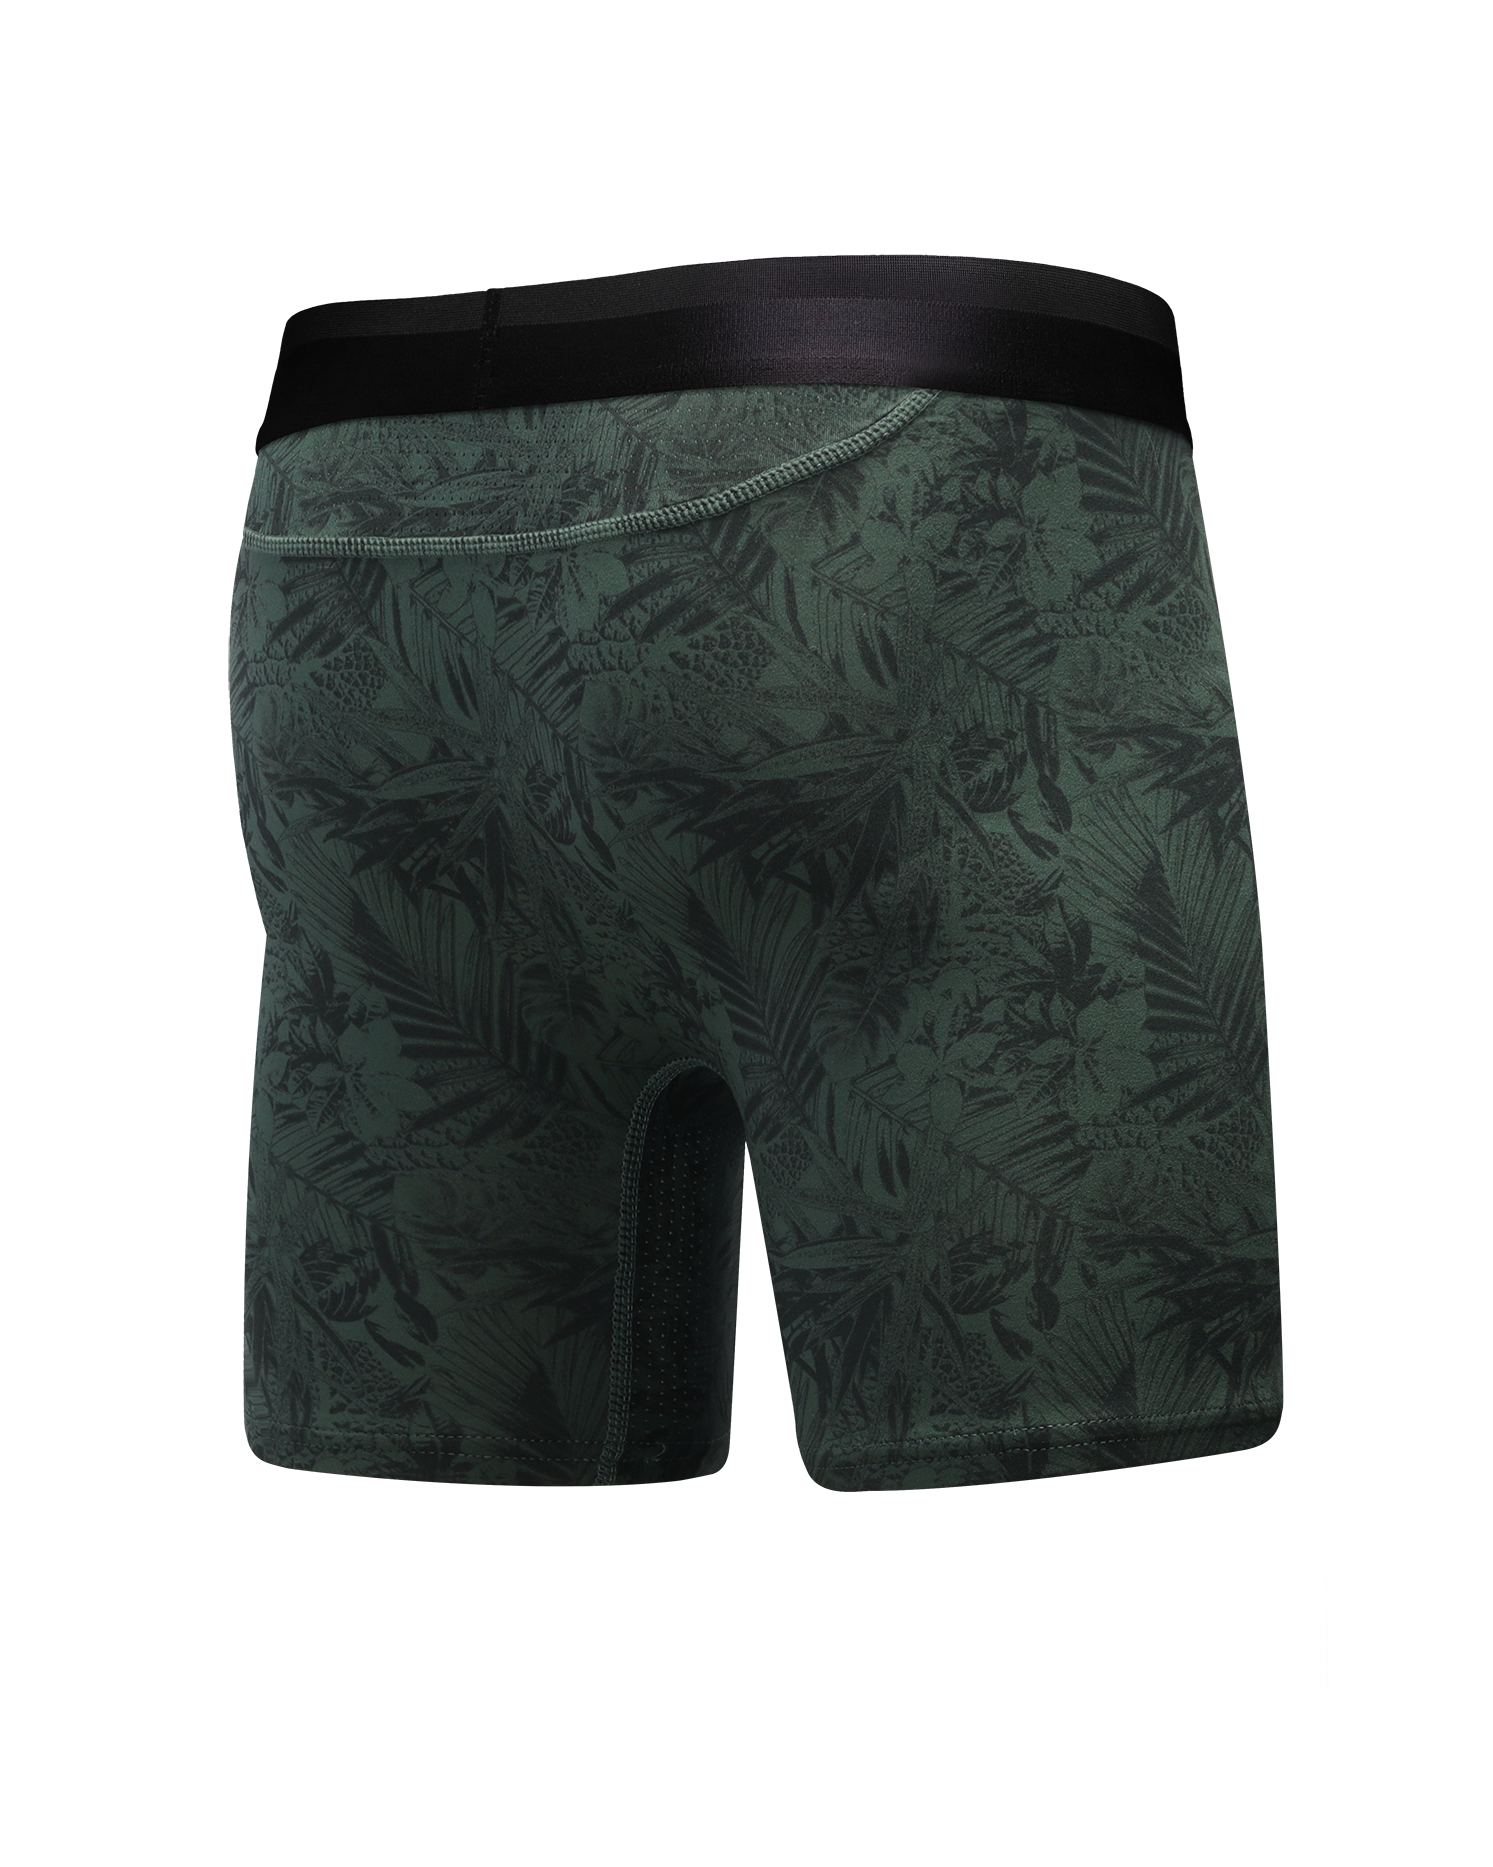 All Citizens: The Paradise Pocket Boxer Briefs are now restocked!